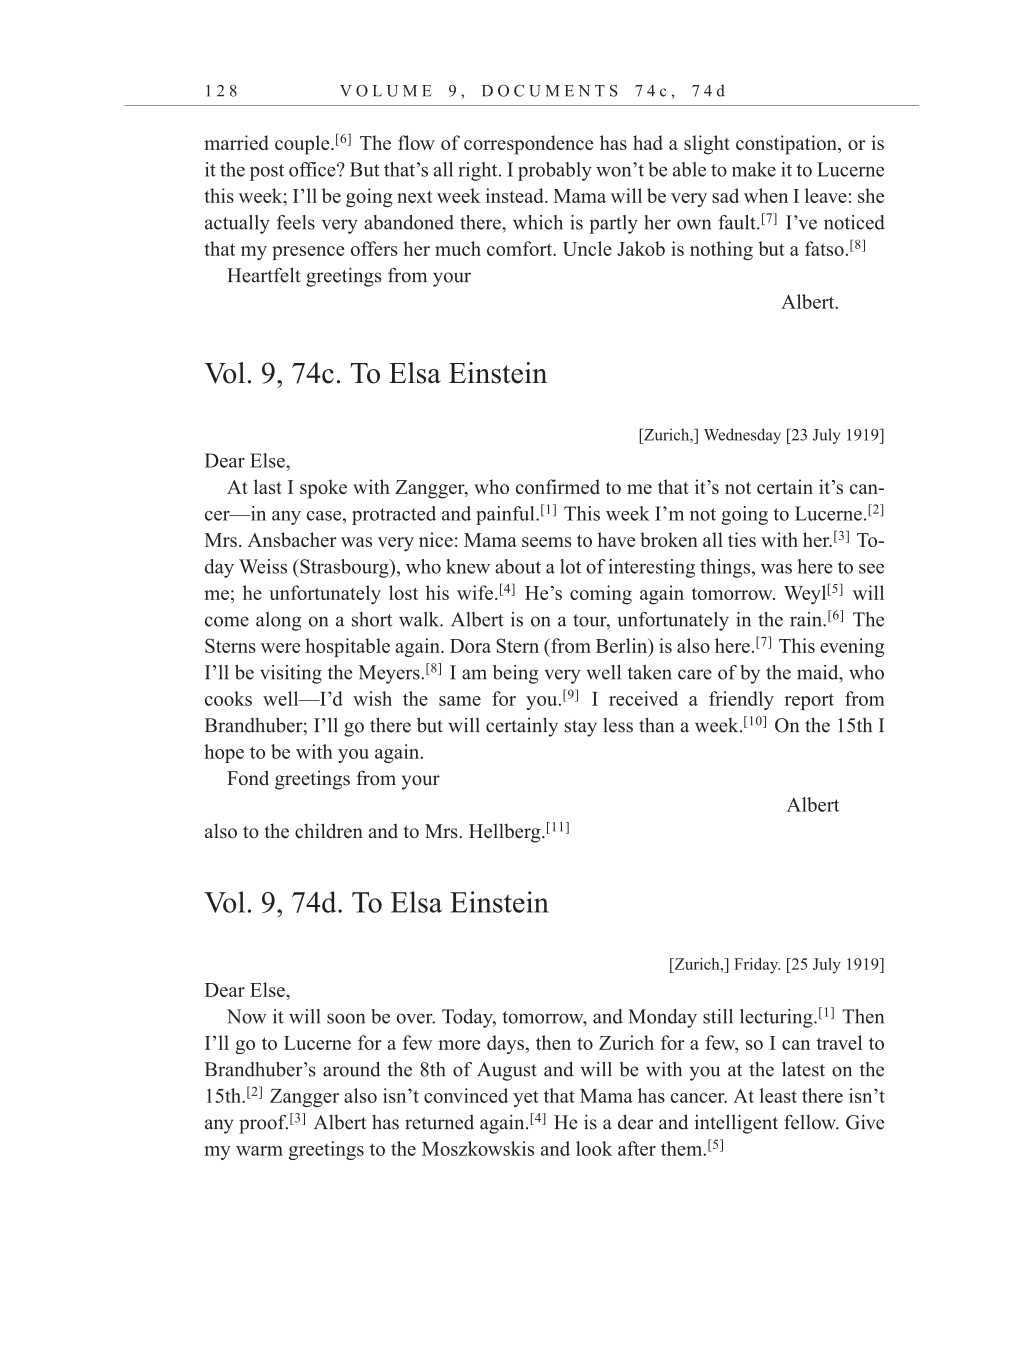 Volume 10: The Berlin Years: Correspondence, May-December 1920, and Supplementary Correspondence, 1909-1920 (English translation supplement) page 128